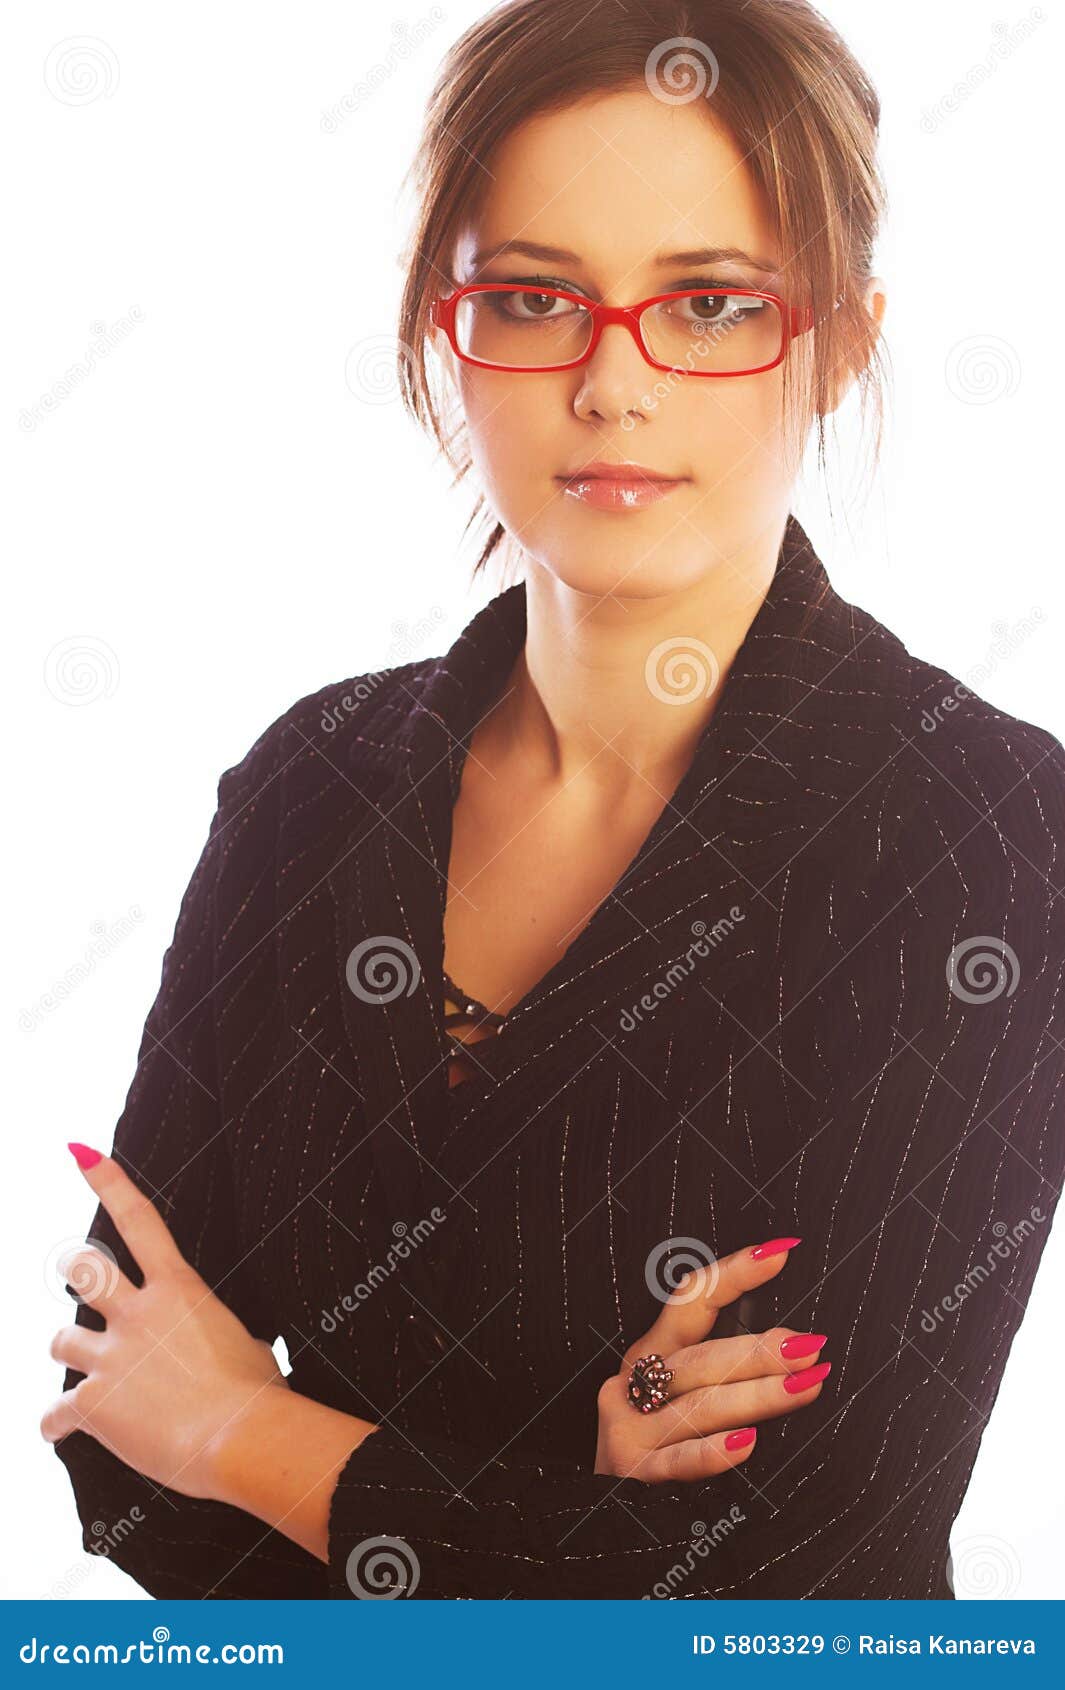 Beautiful Woman In Glasses Royalty Free Stock Images